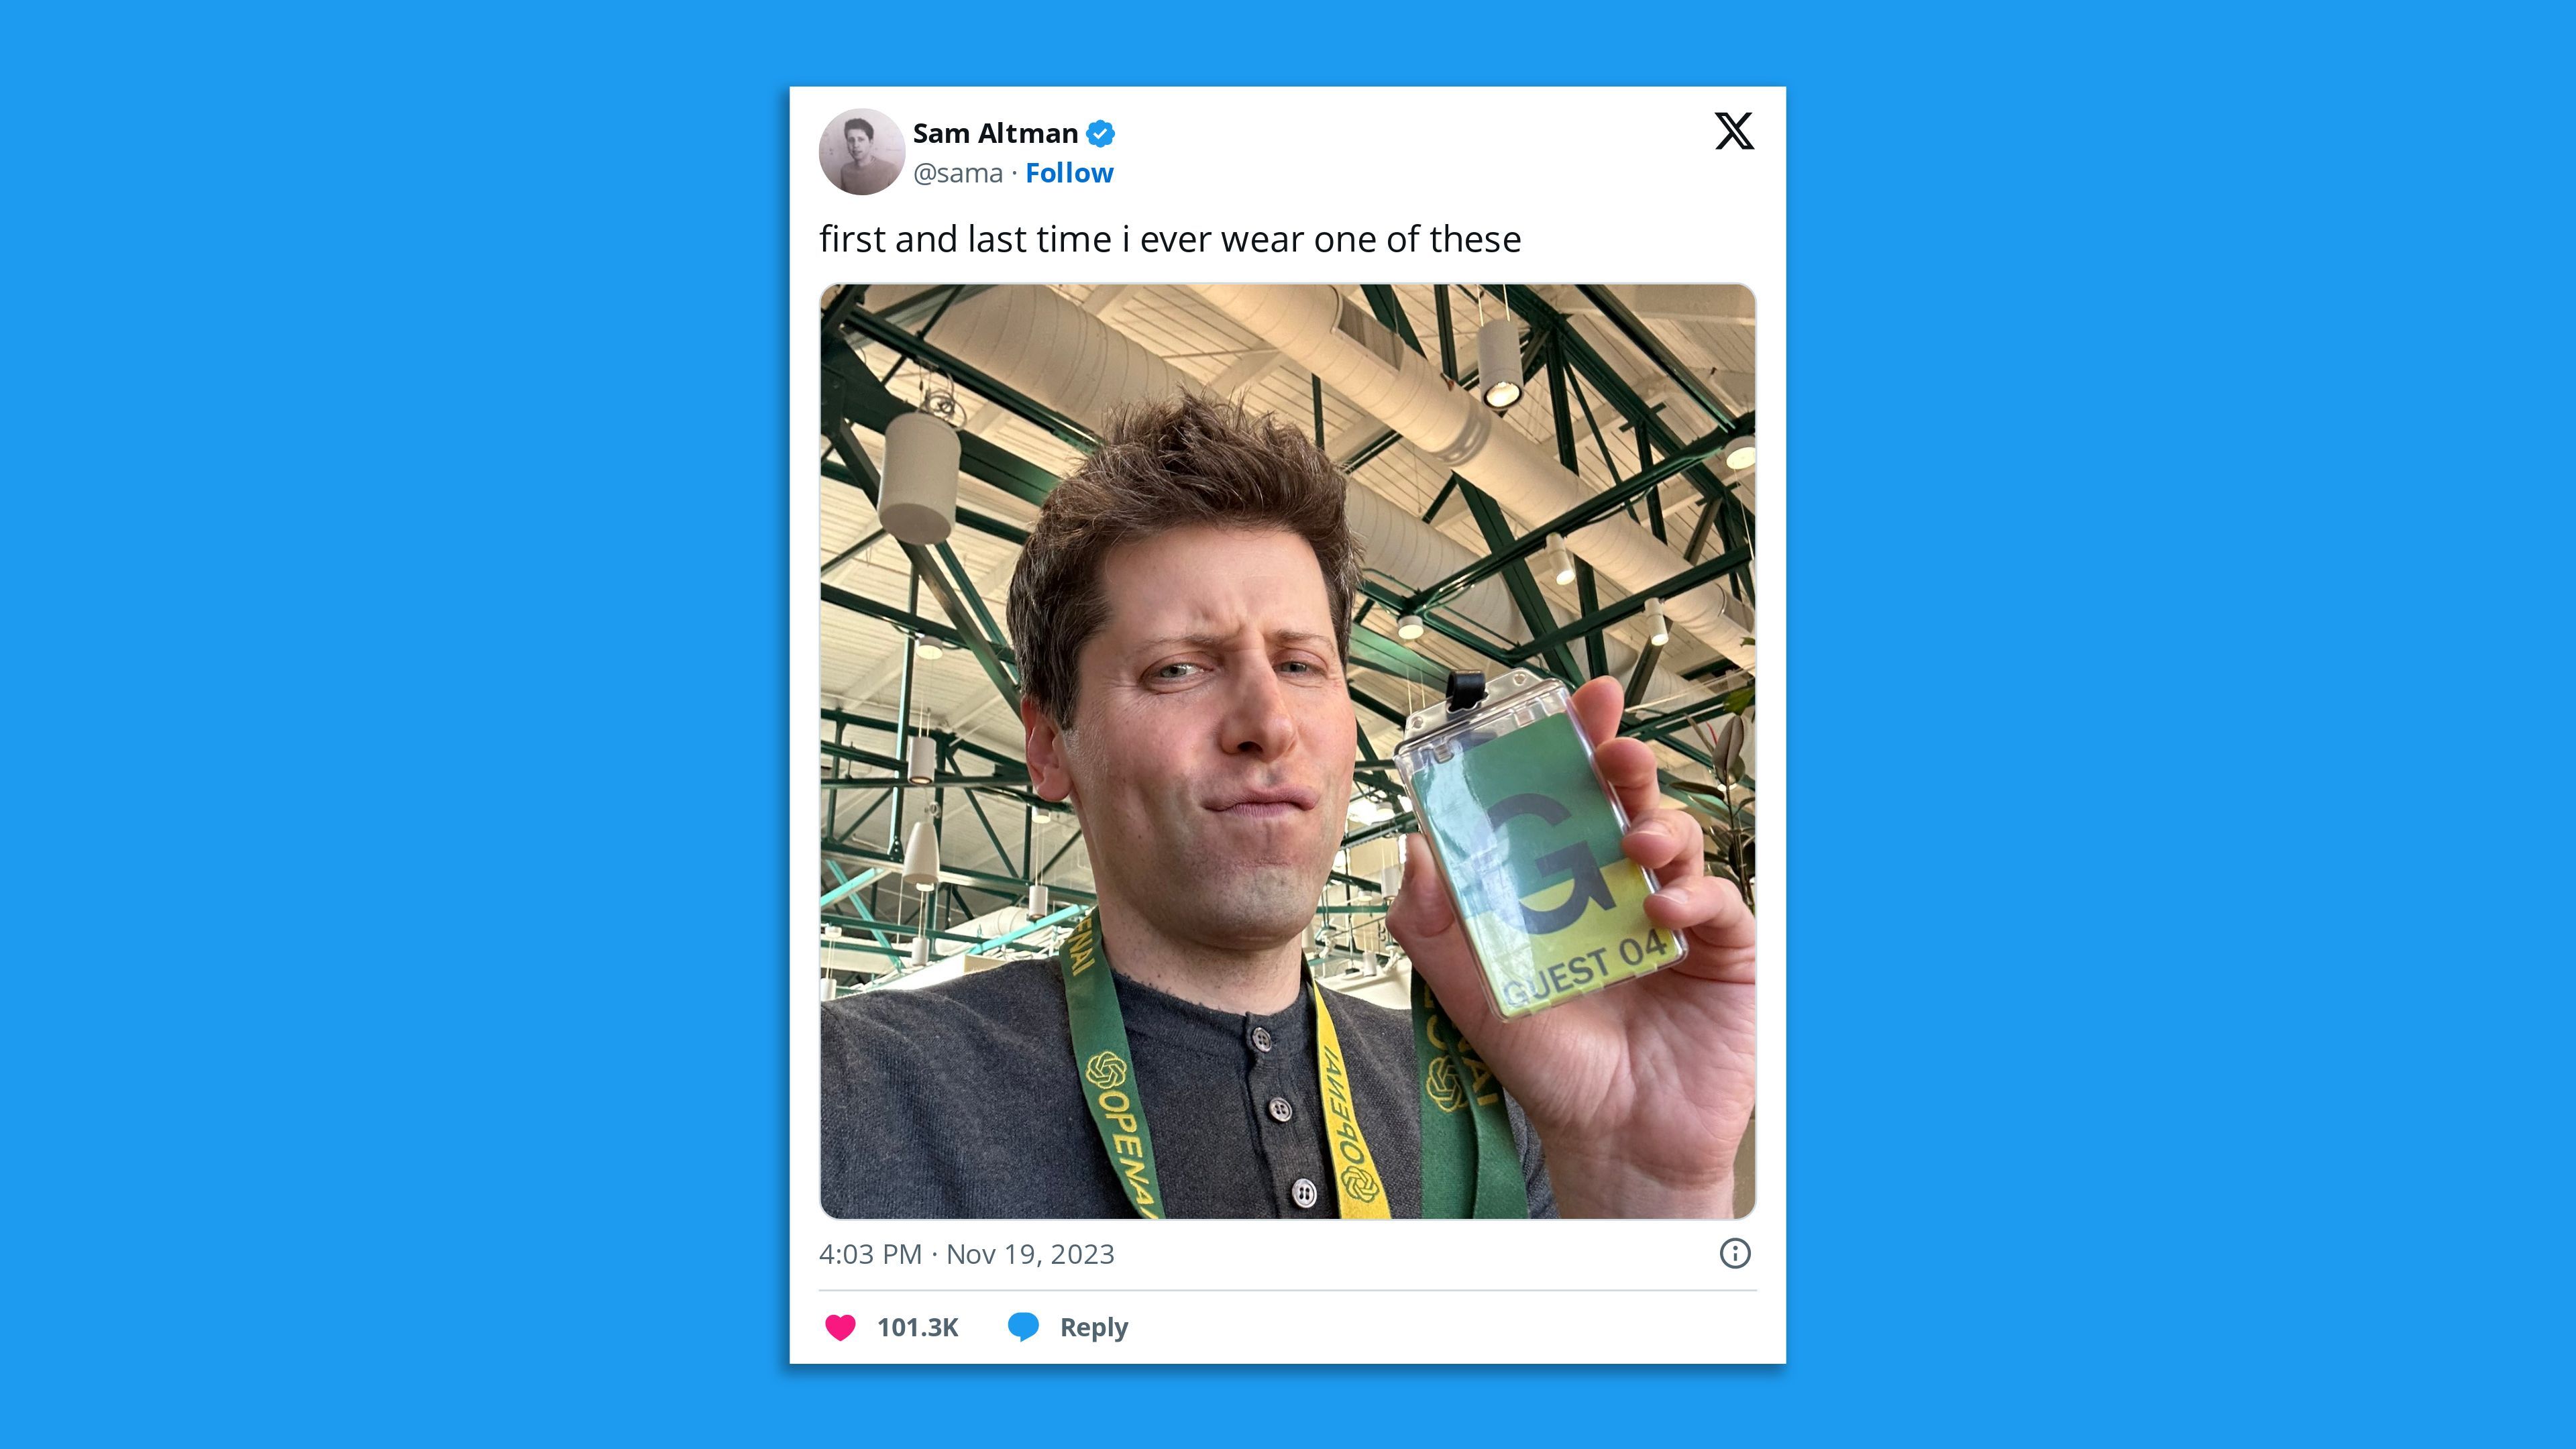 A screenshot of a tweet of Sam Altman holding a Microsoft badge. The tweet says first and last time i ever wear one of these